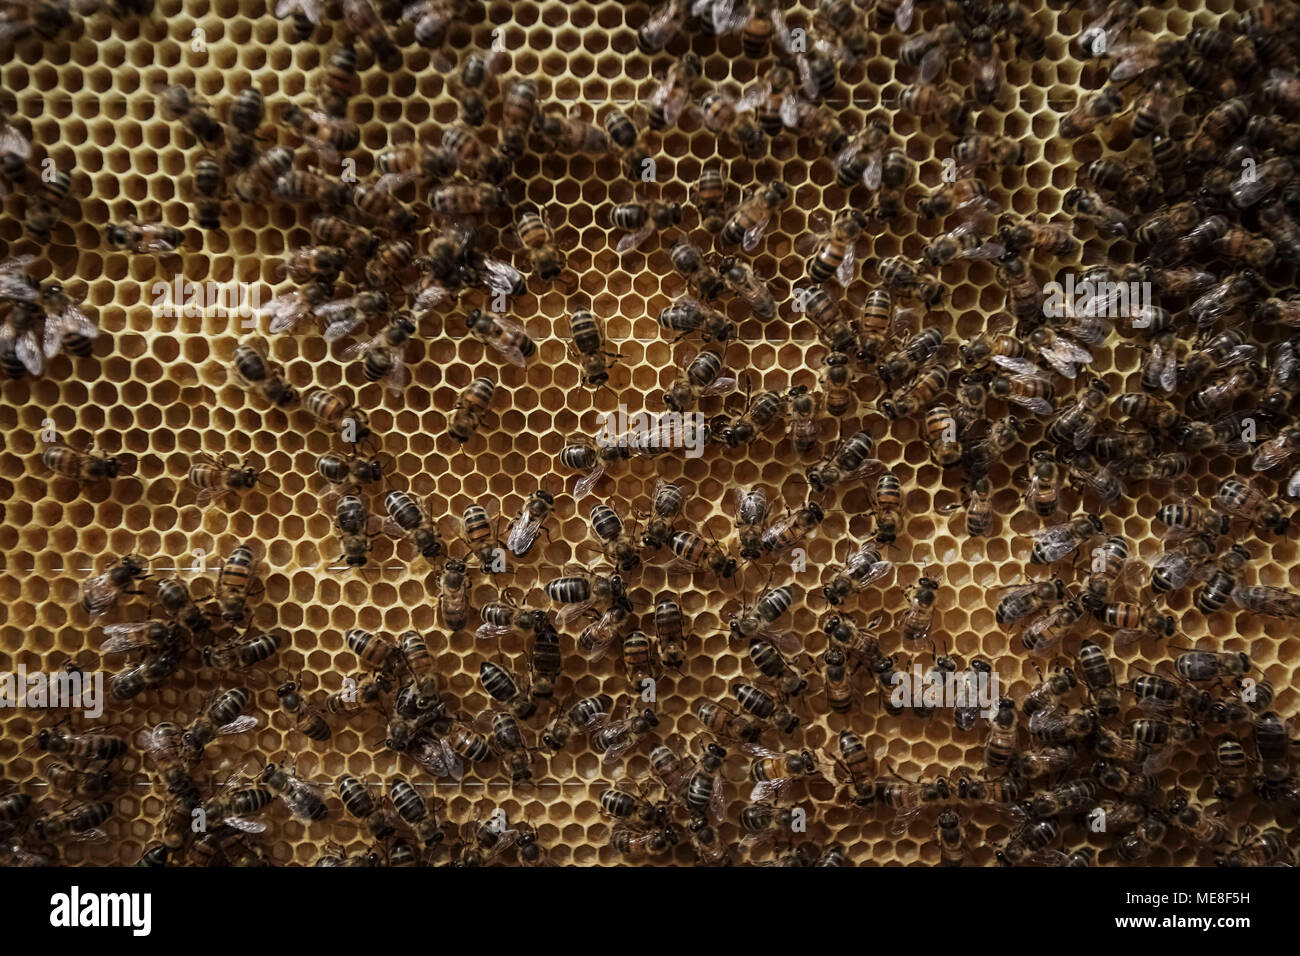 Guasca. 18th Apr, 2018. Image taken on April 18, 2018 shows bees in a hive in the Montiel natural reserve of Guasca in Colombia. Credit: Jhon Paz/Xinhua/Alamy Live News Stock Photo